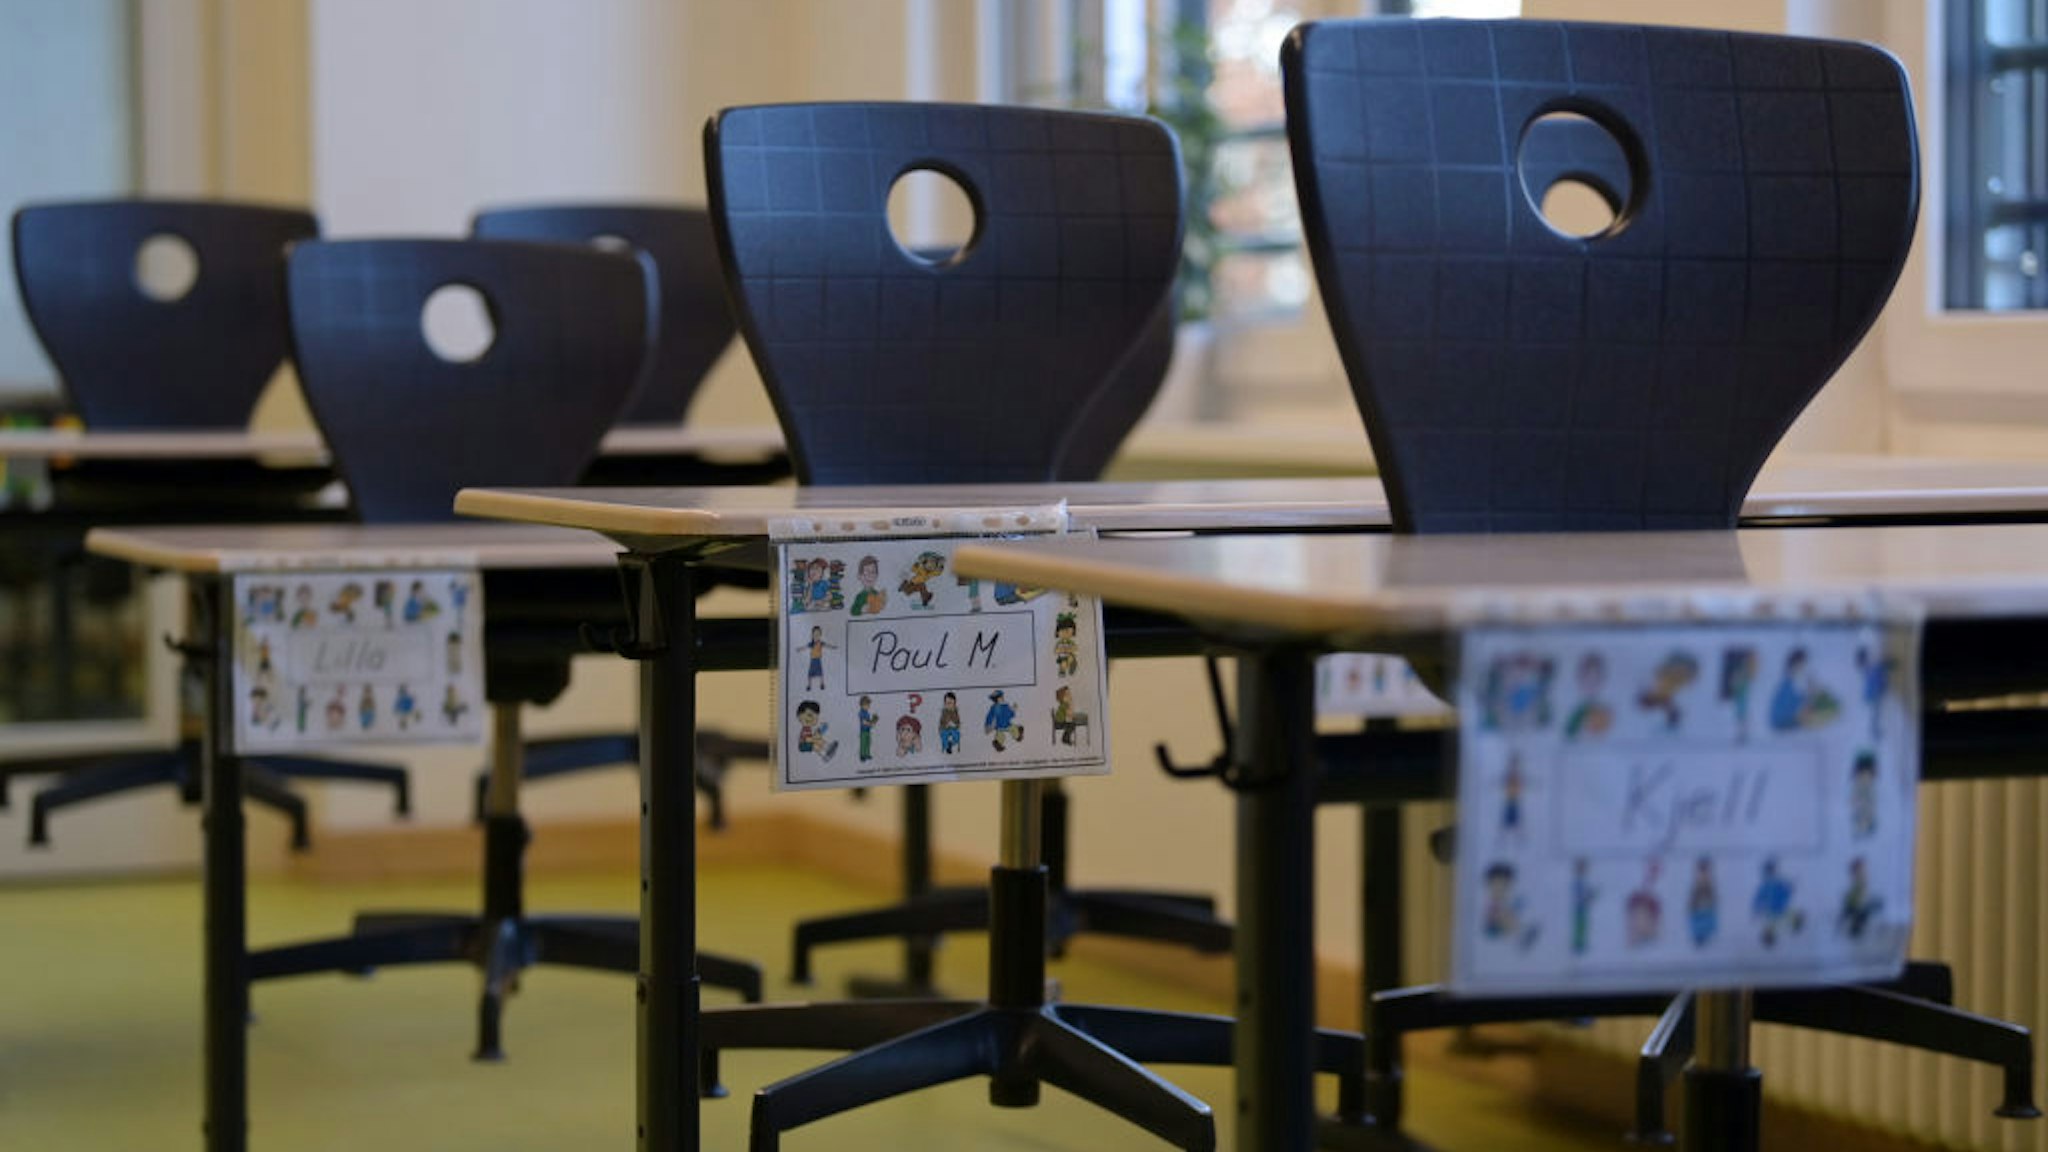 The chairs are placed on the school desks marked with first names in a classroom at the Comenius School. The integrative primary school with language support groups had moved to Oranienburg-Süd five years ago into a new building. (to ""We are getting better every day" - Oranienburg school masters crisis")